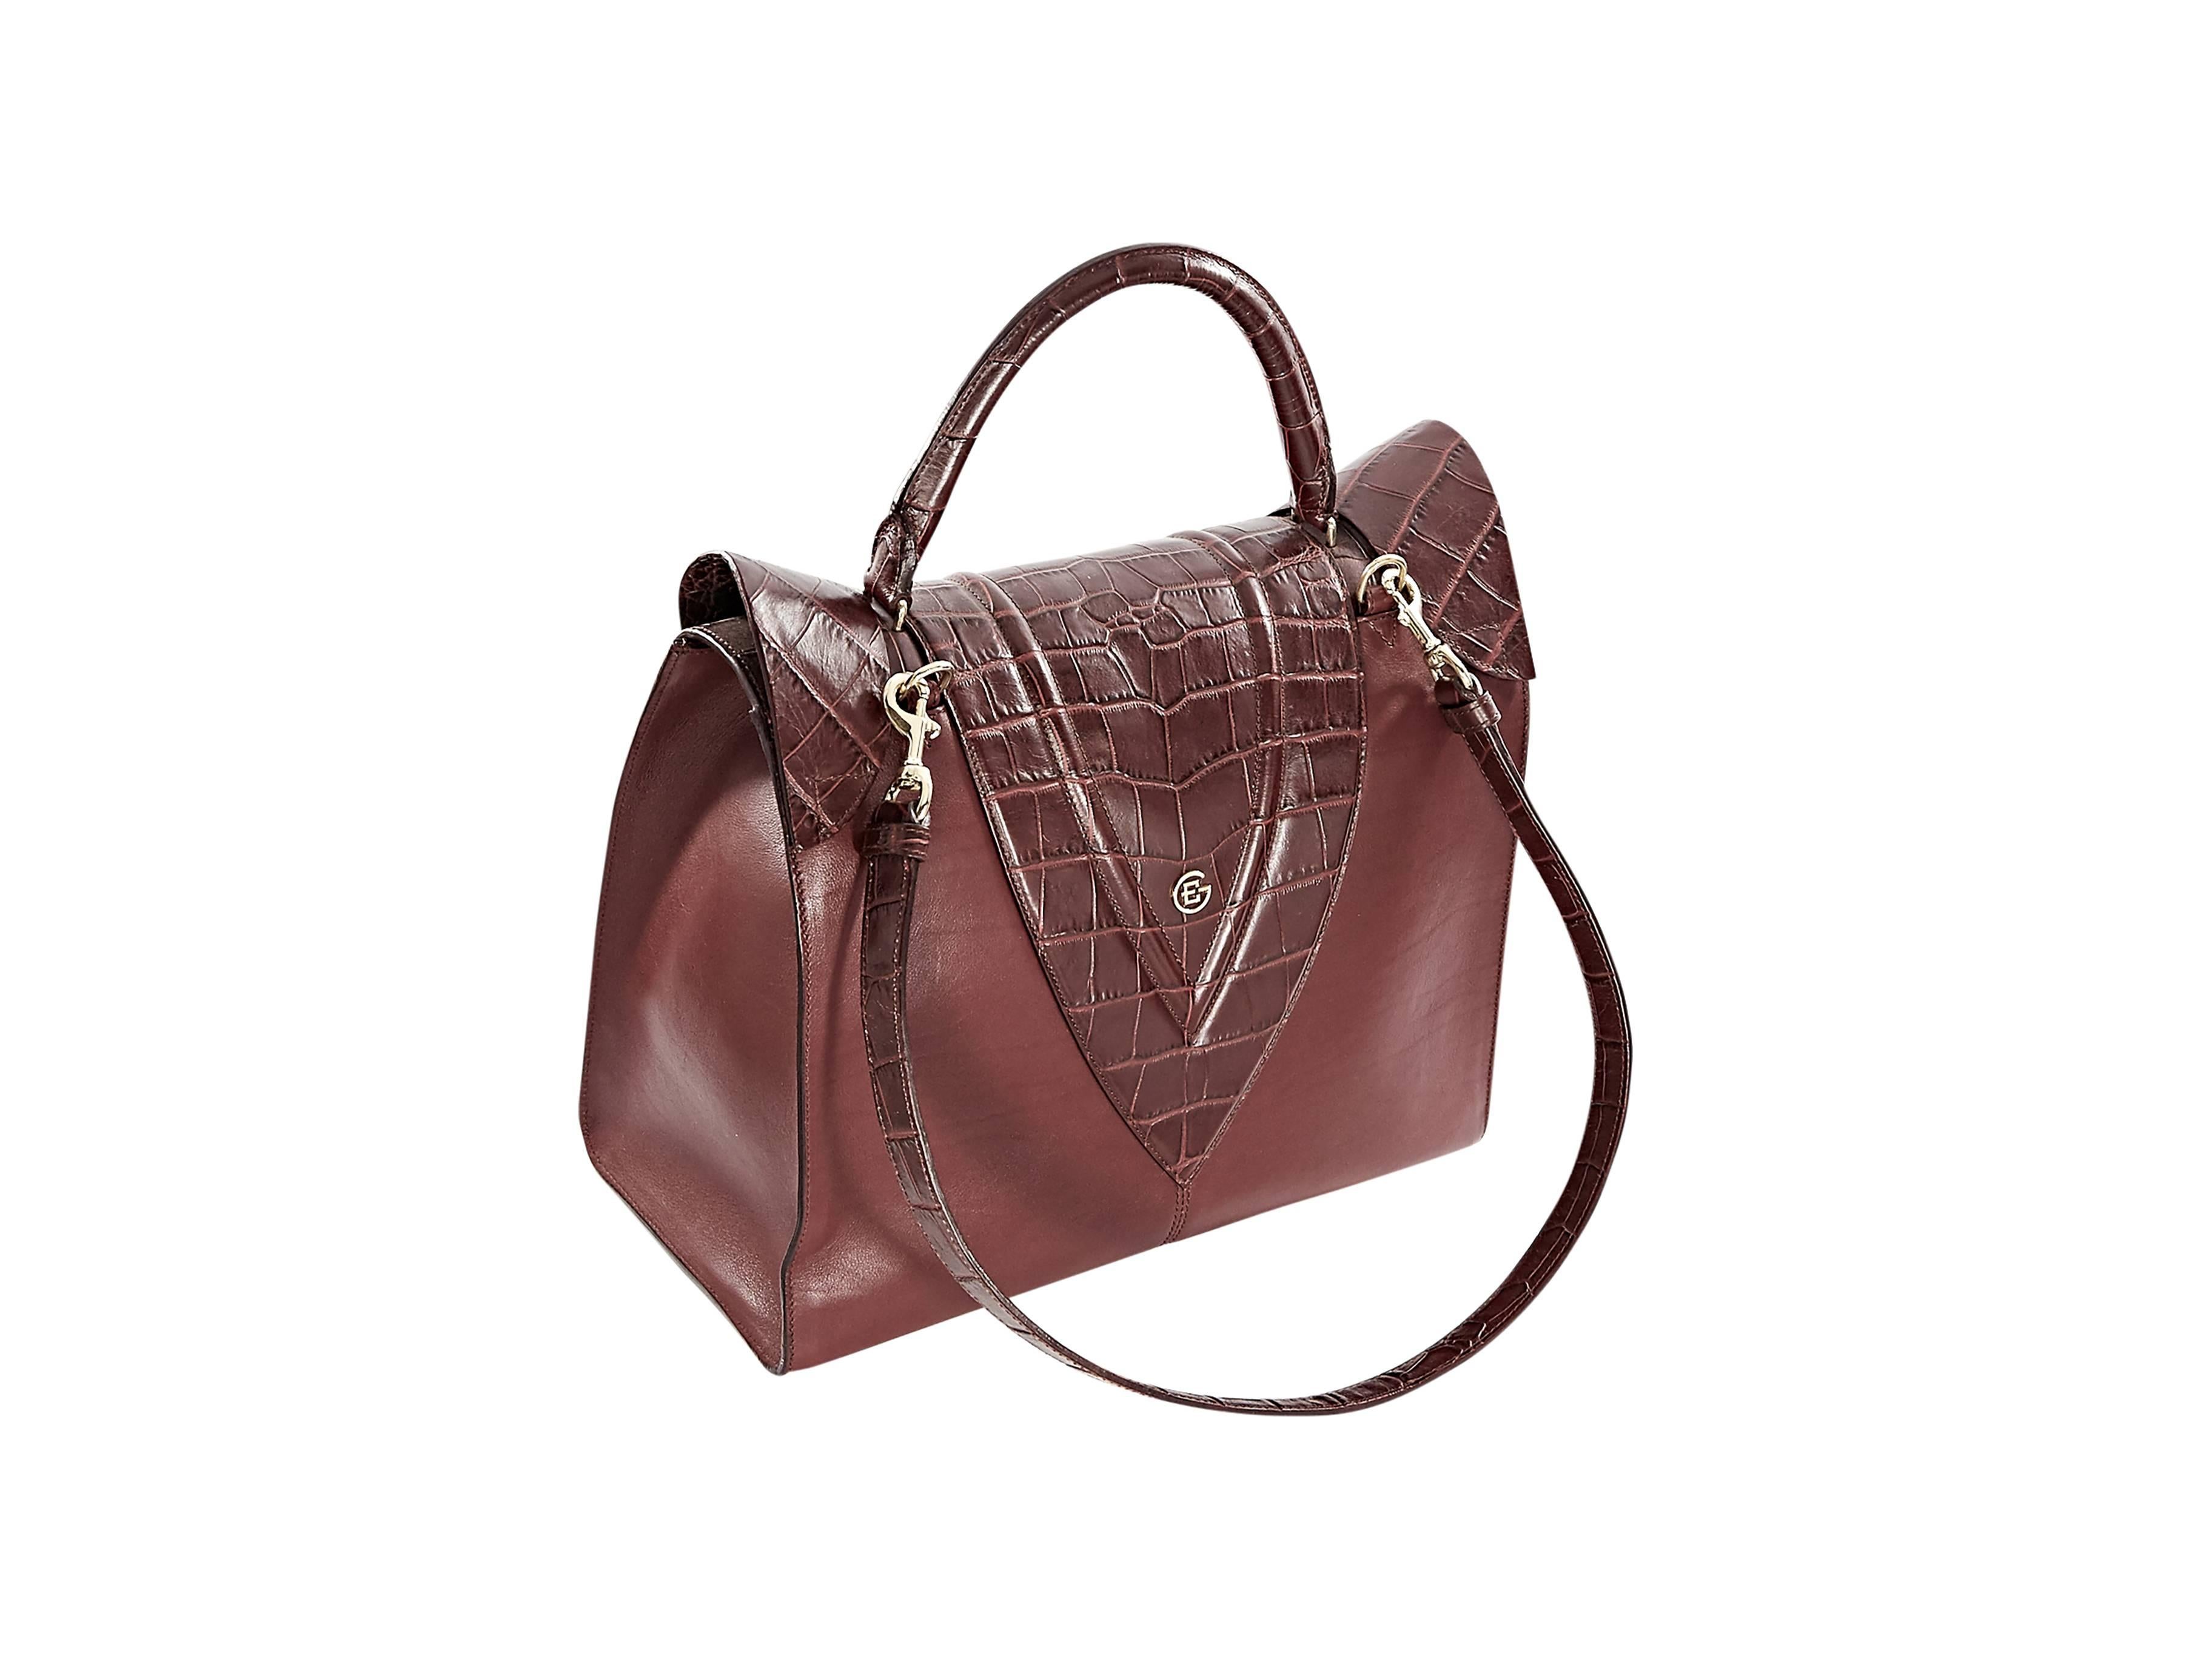 Burgundy leather satchel handbag by Elena Ghisellini.  Top handle.  Detachable crossbody strap.  Snake-embossed front flap.  Hidden closure.  Lined interior with inner pockets.  Removable zip-close pouch.  Protective metal feet.  Goldtone hardware.